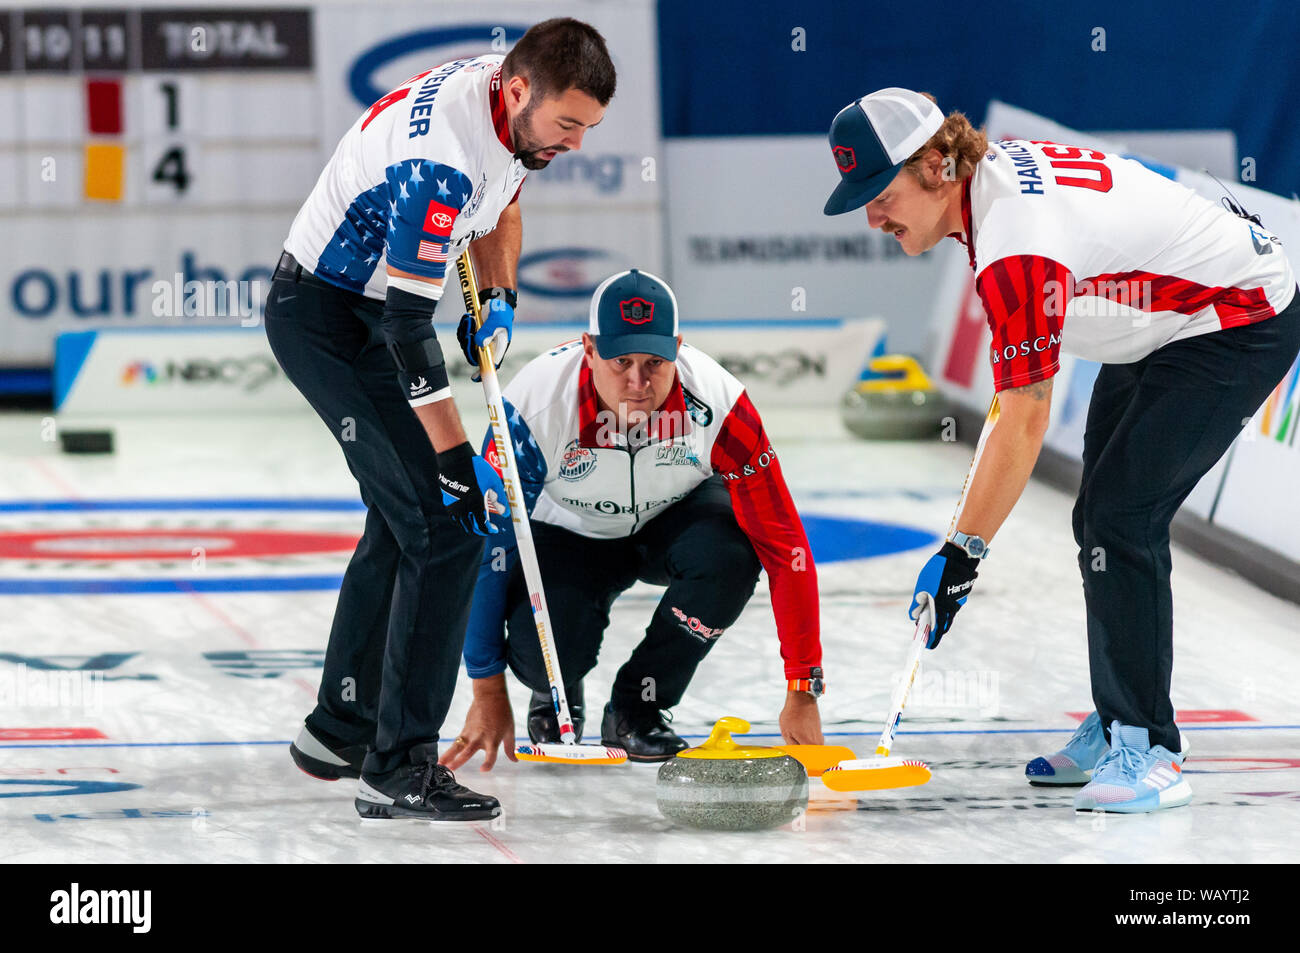 Raleigh, North Carolina, USA. 22nd Aug, 2019. Aug. 22, 2019 Ã RALEIGH, N.C., US - JOHN LANDSTEINER, JOHN SHUSTER, and MATT HAMILTON of the United States in action during Curling Night in America at the Raleigh Ice Plex. Curling Night in America featured members of the U.S. Olympic menÃs gold medal team from the 2018 Winter Olympics in South Korea U.S. womenÃs team, as well as teams from Italy, Japan, and Scotland, Aug. 22-24, 2019. Credit: Timothy L. Hale/ZUMA Wire/Alamy Live News Stock Photo